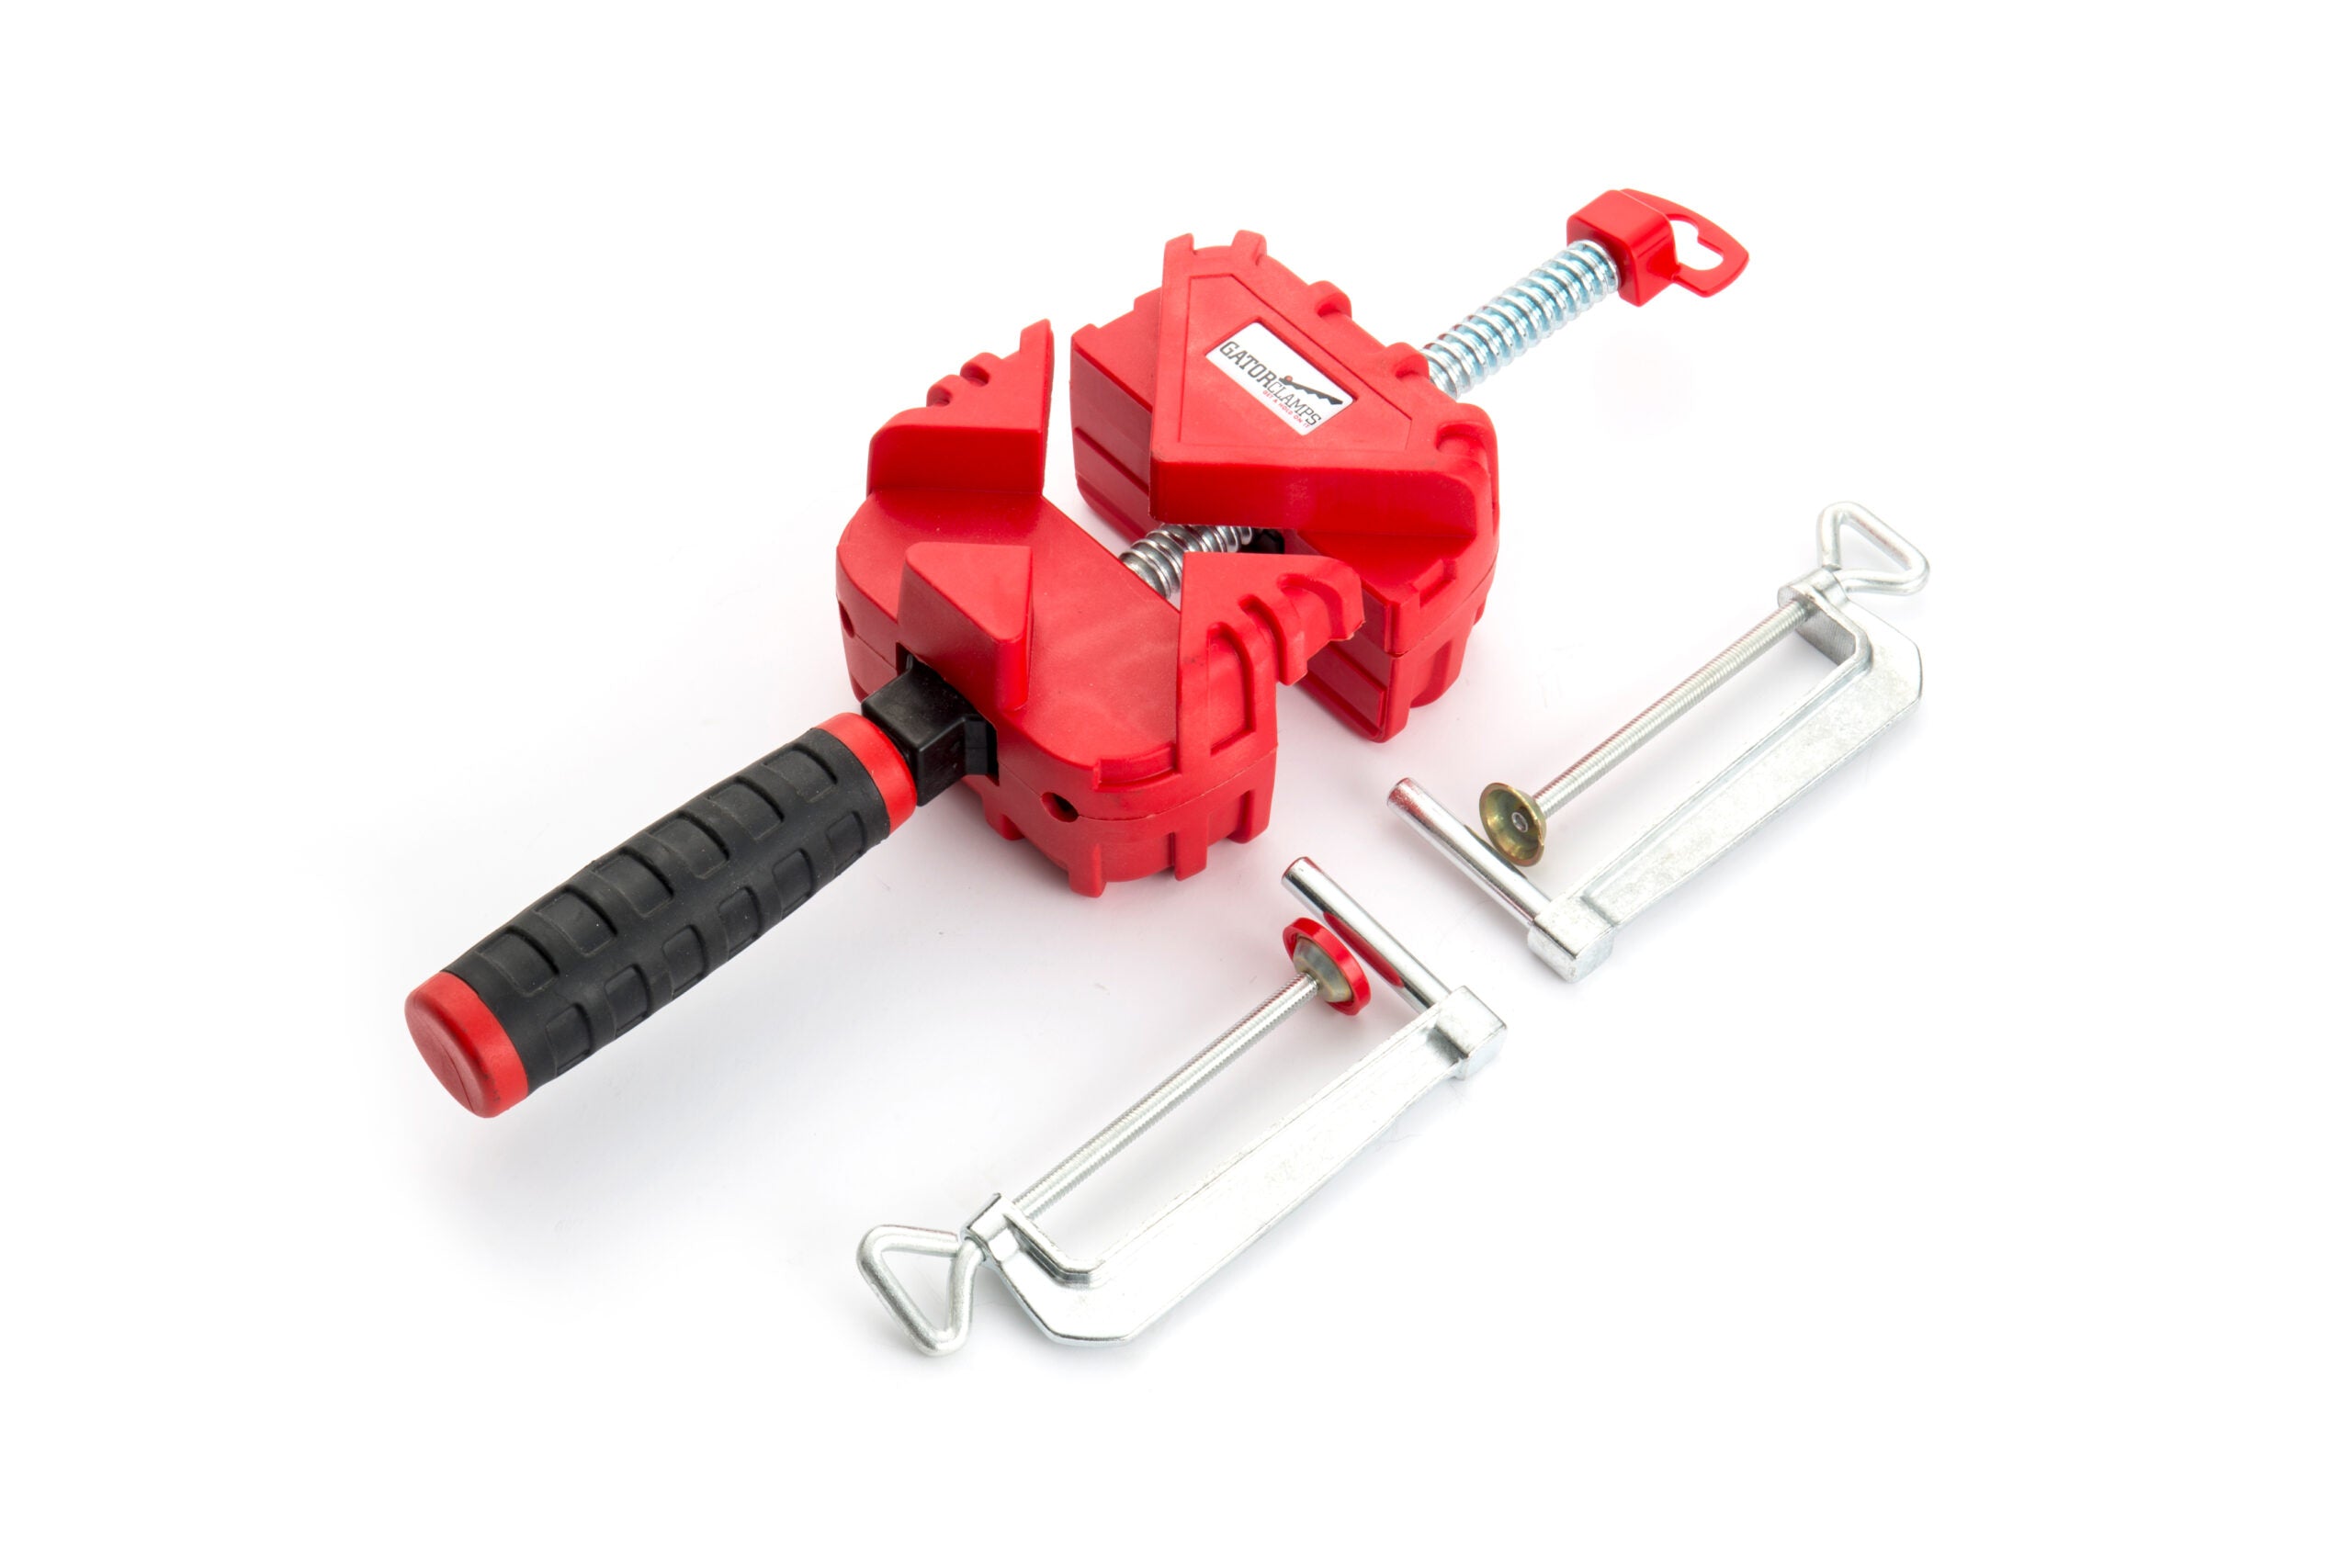 Gator Clamps Clamp 'n' Vice Set